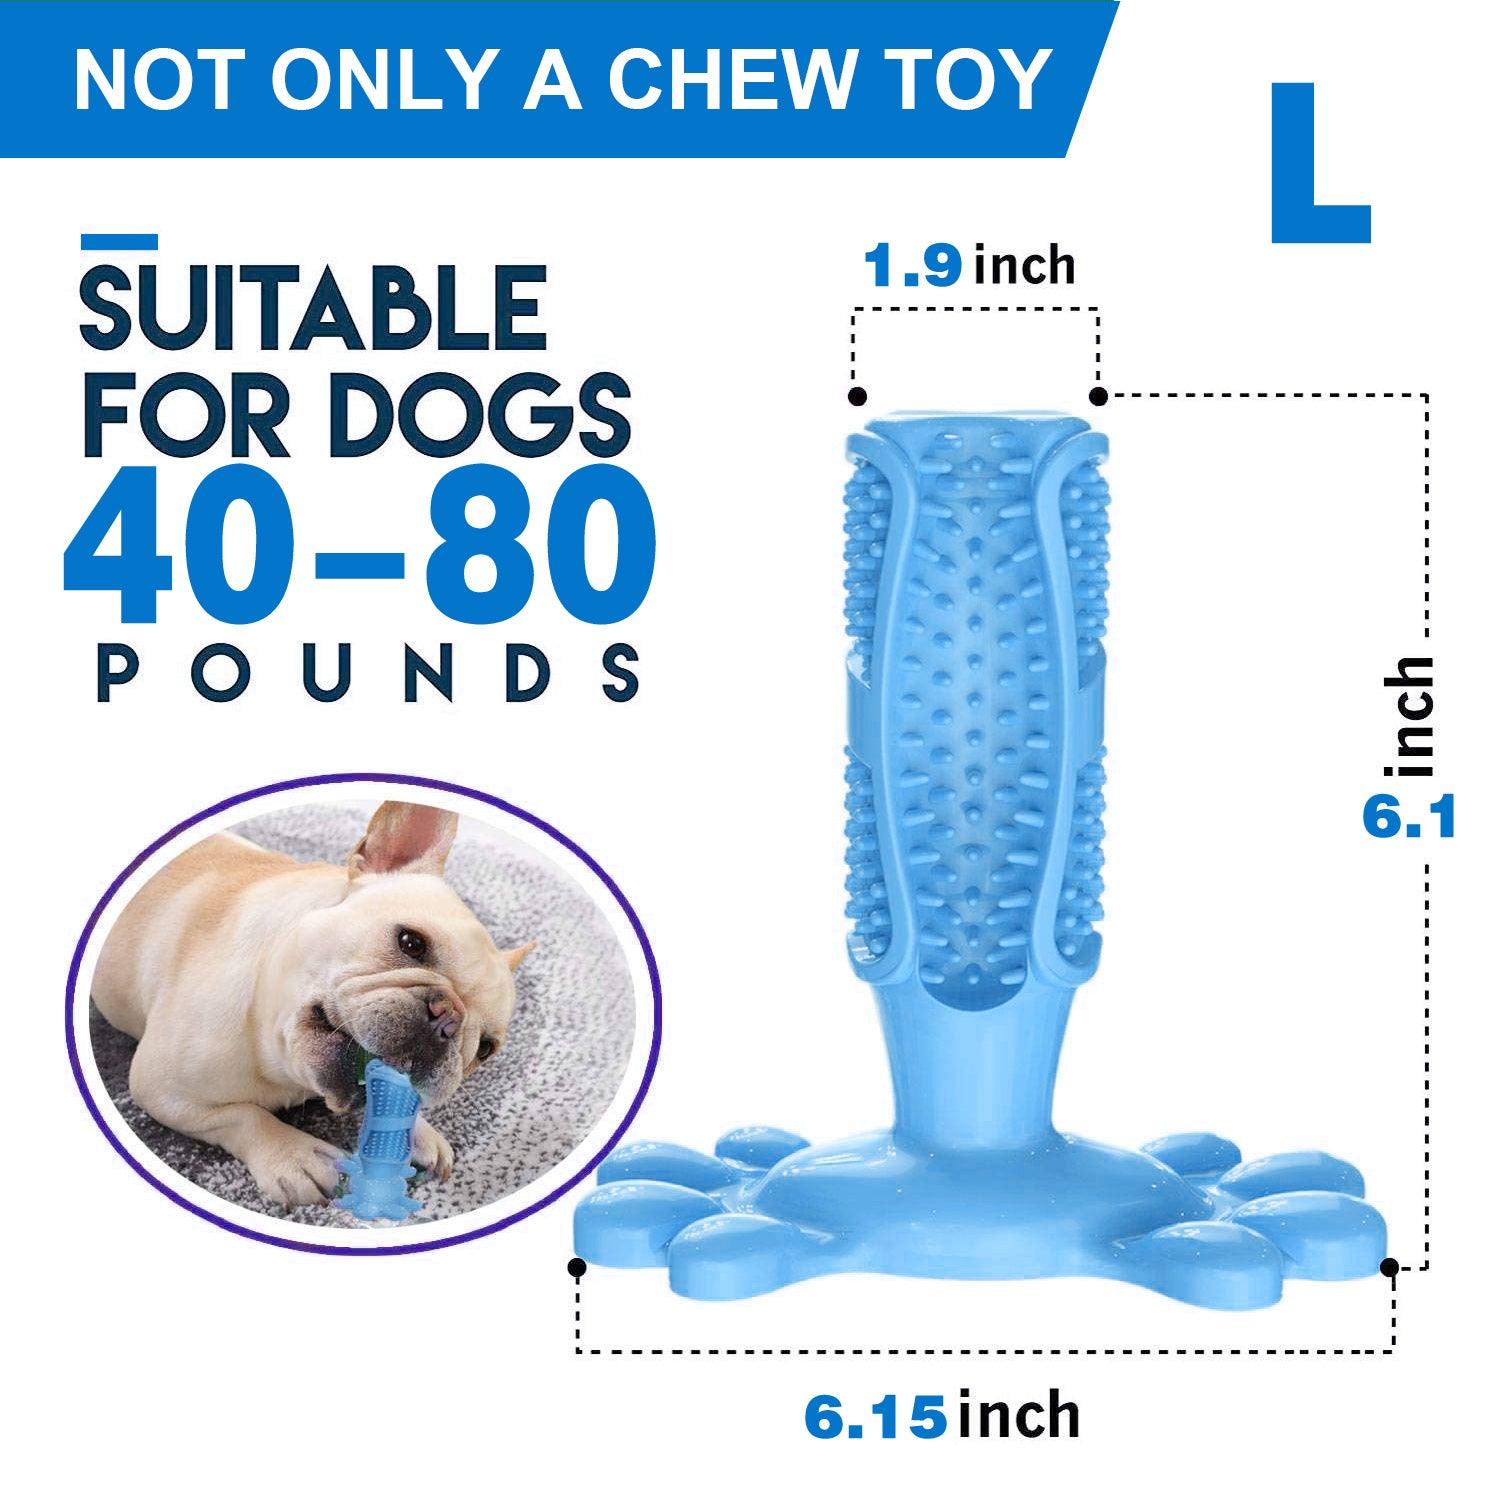 Dog Toothbrush Chew Toys Natural Rubber Dog Tooth Cleaner - iTalkPet